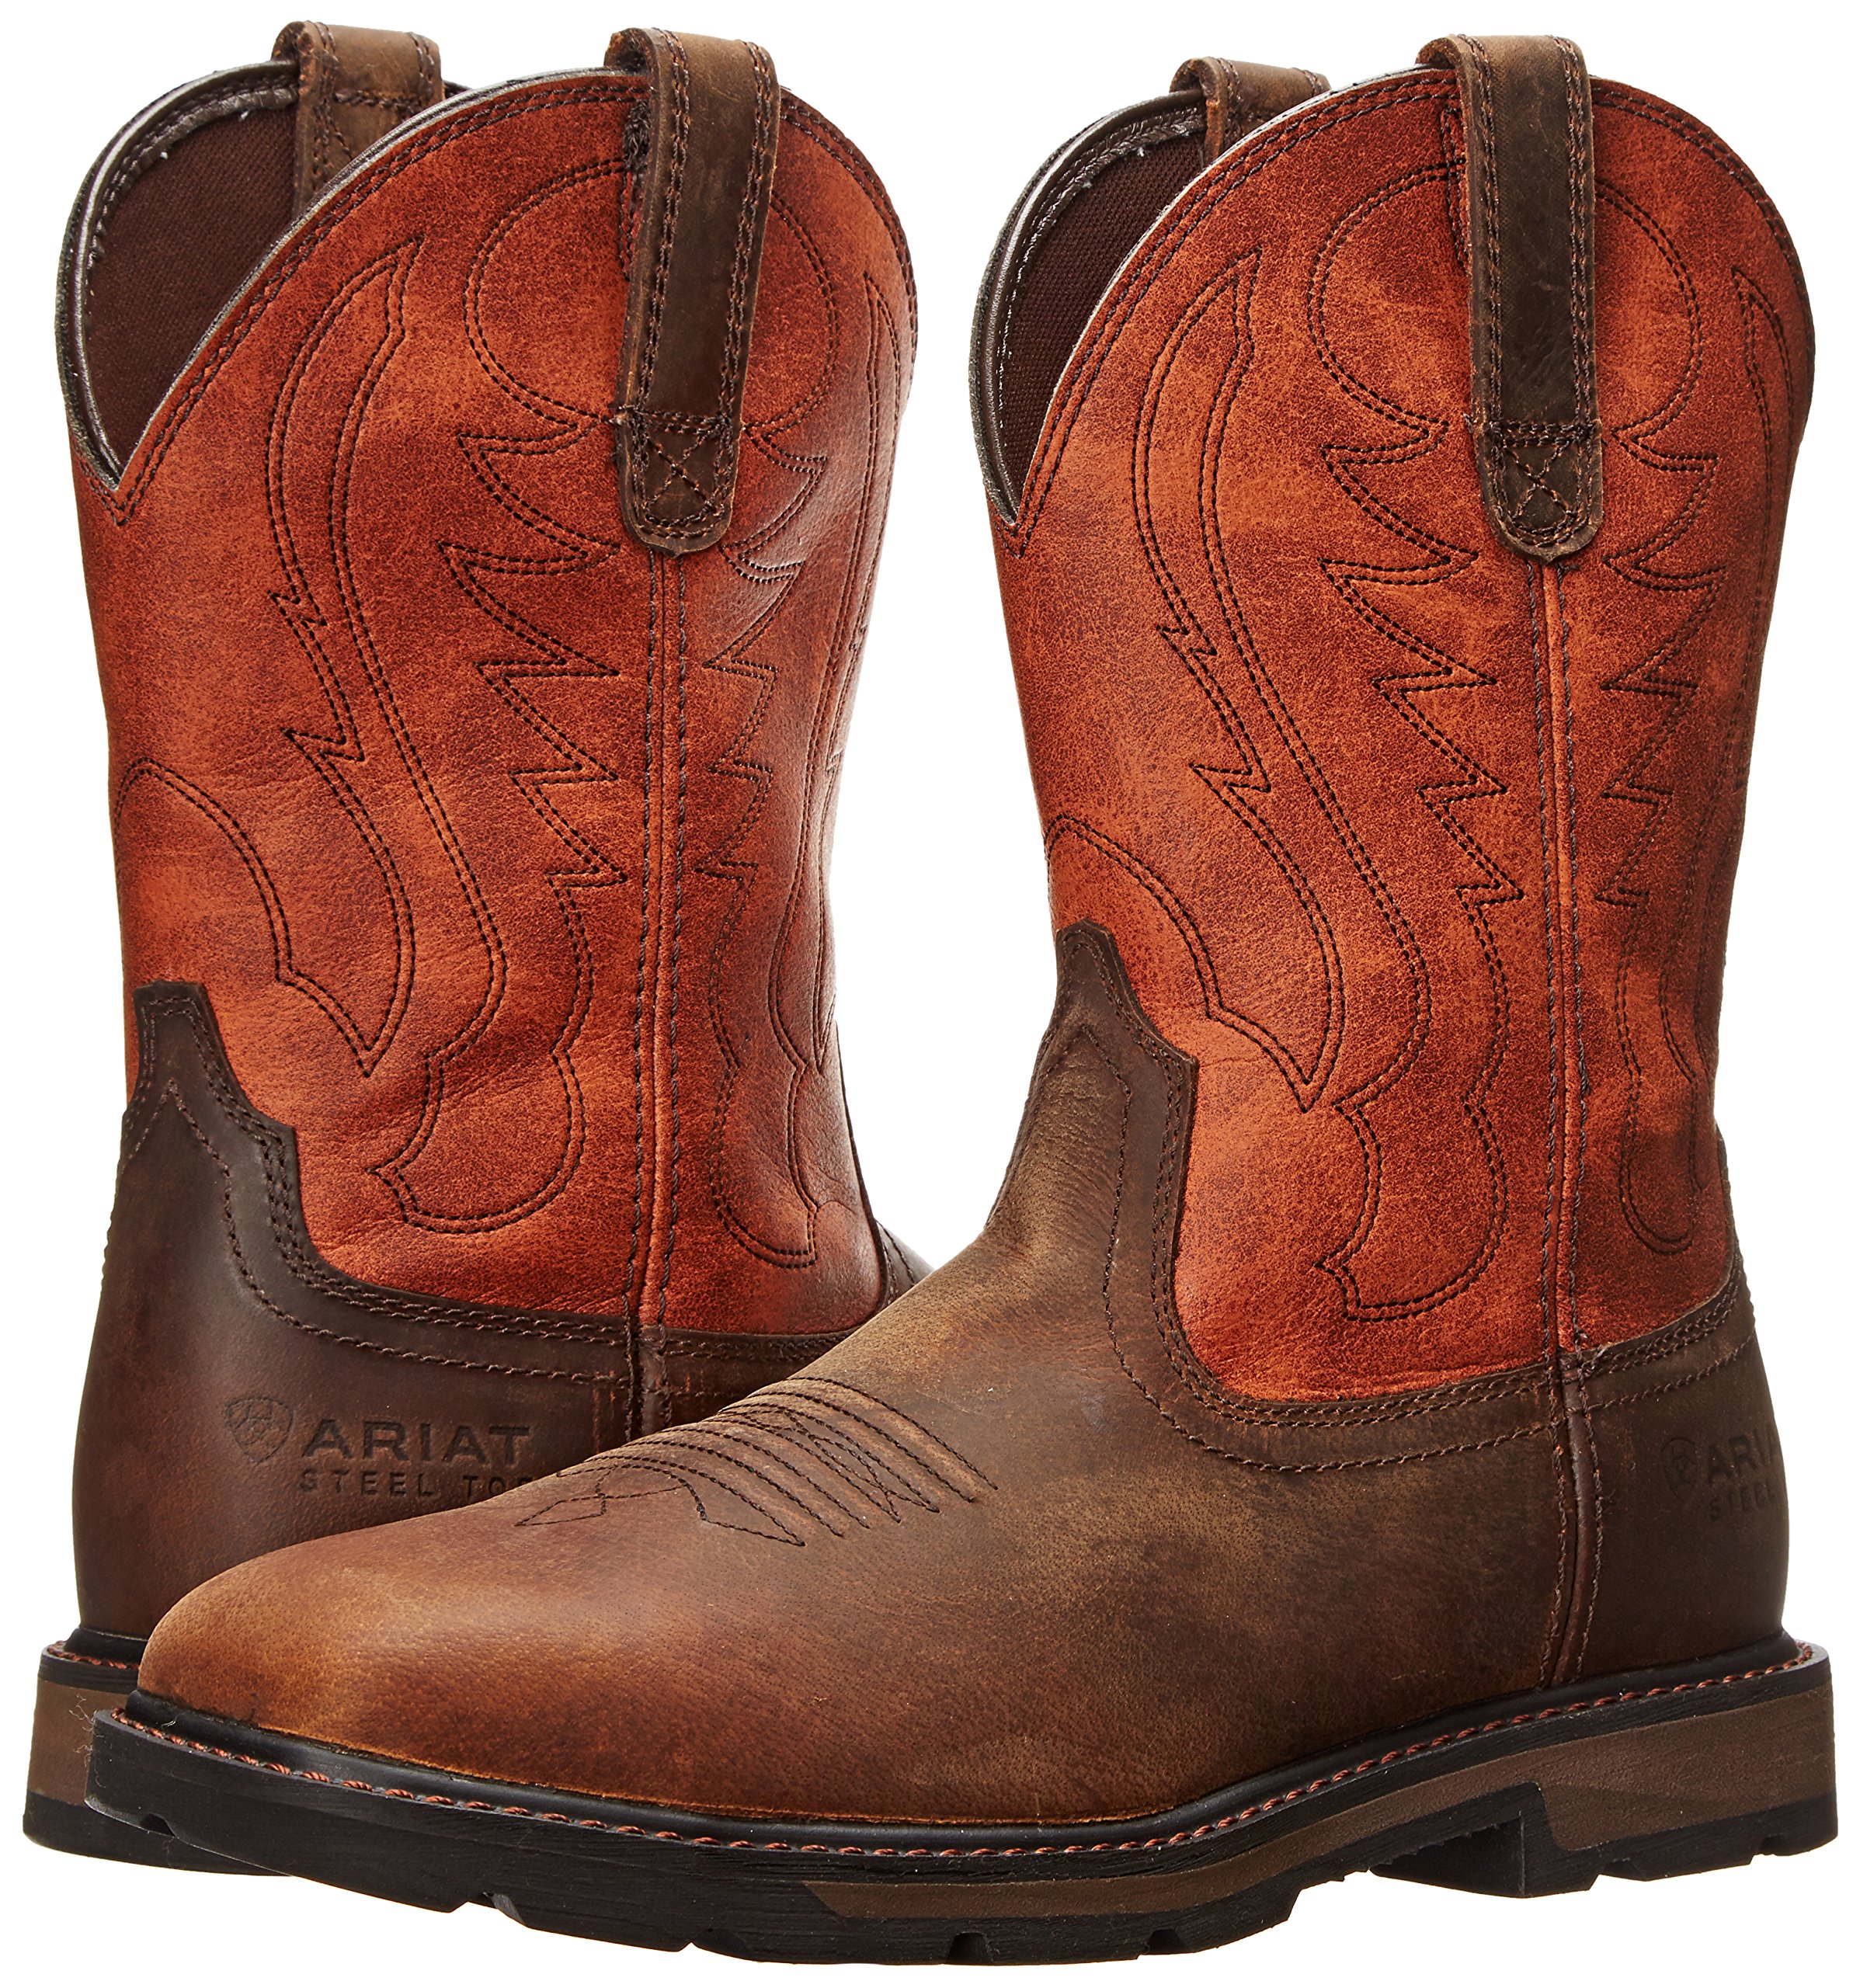 Ariat Groundbreaker Wide Square Steel Toe Work Boots - Men's Safety Toe Leather Work Boot